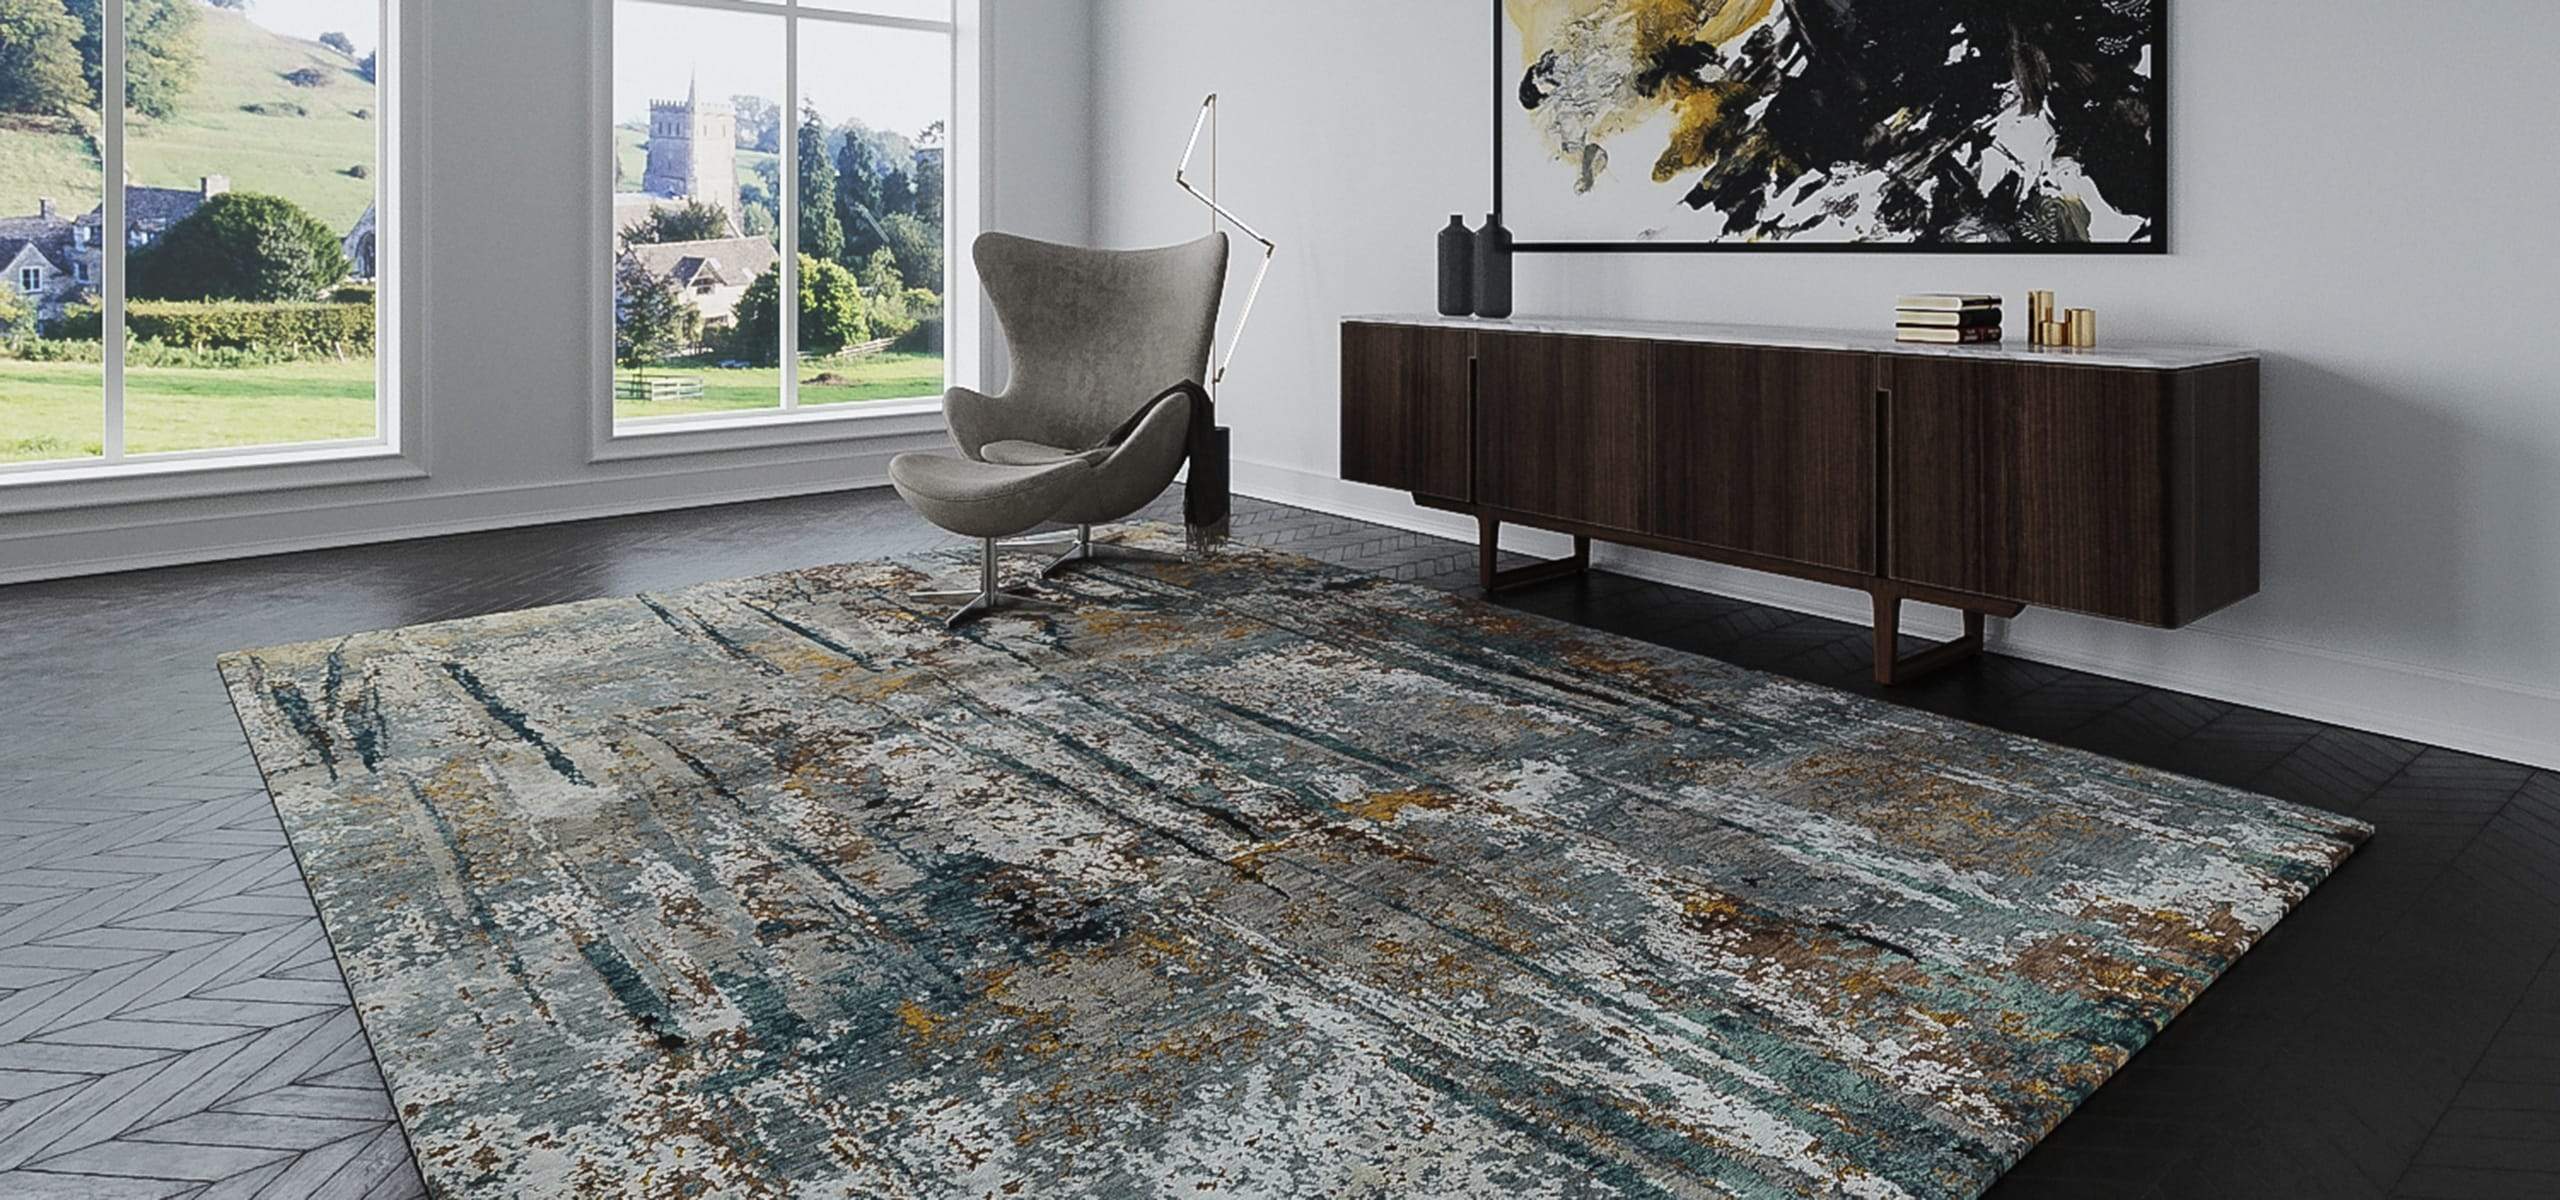 How do I purchase a rug from your Design Catalog